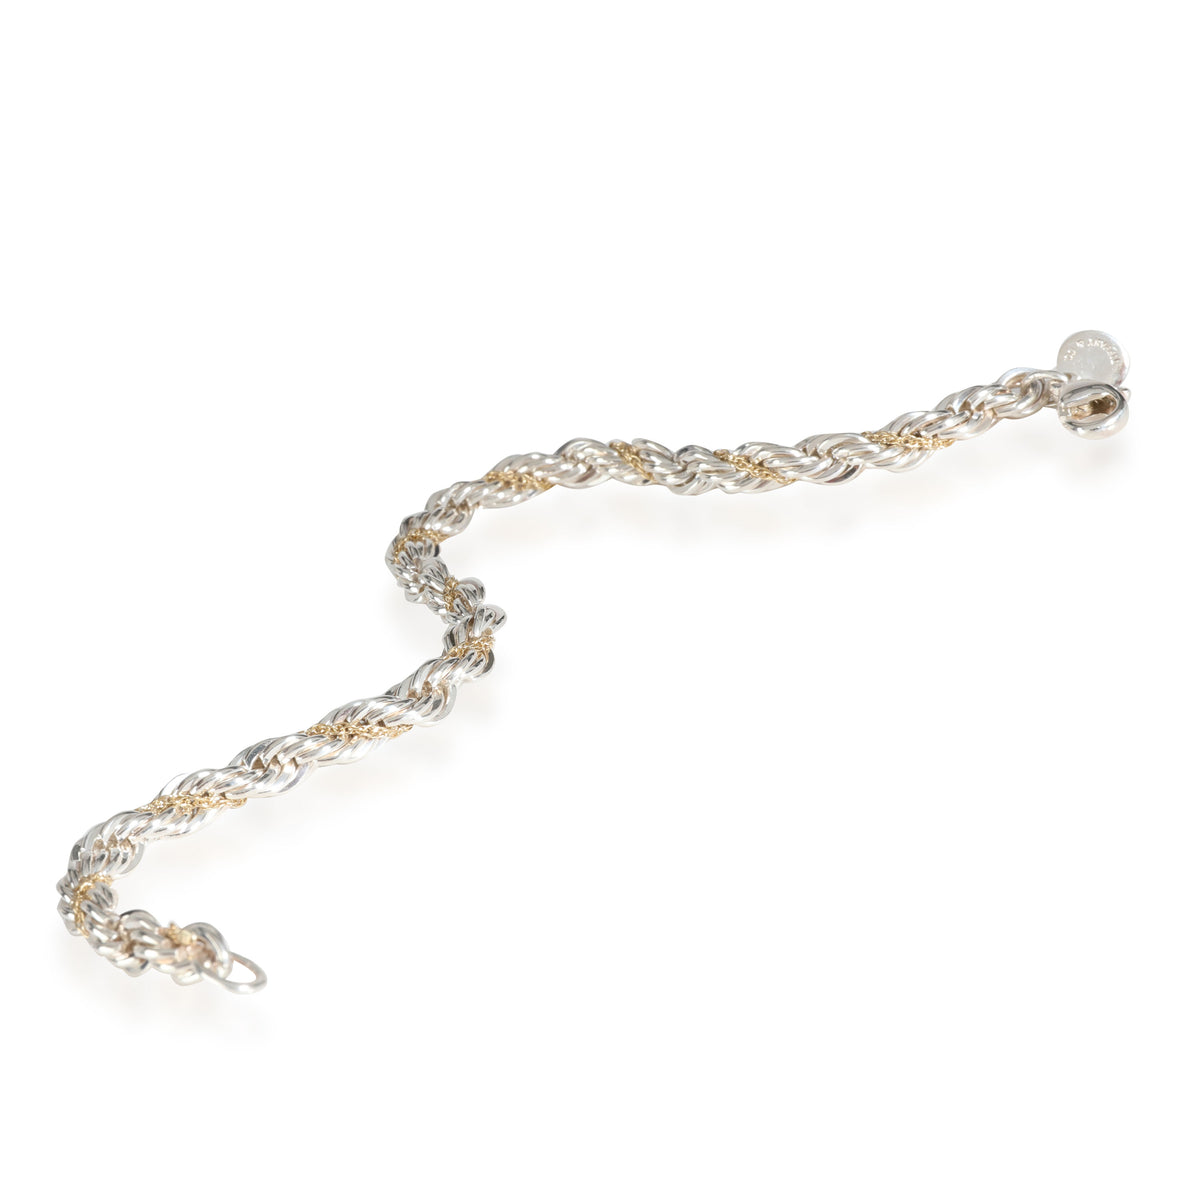 Tiffany & Co. Twisted Rope Bracelet in 18K Yellow Gold/Sterling Silver